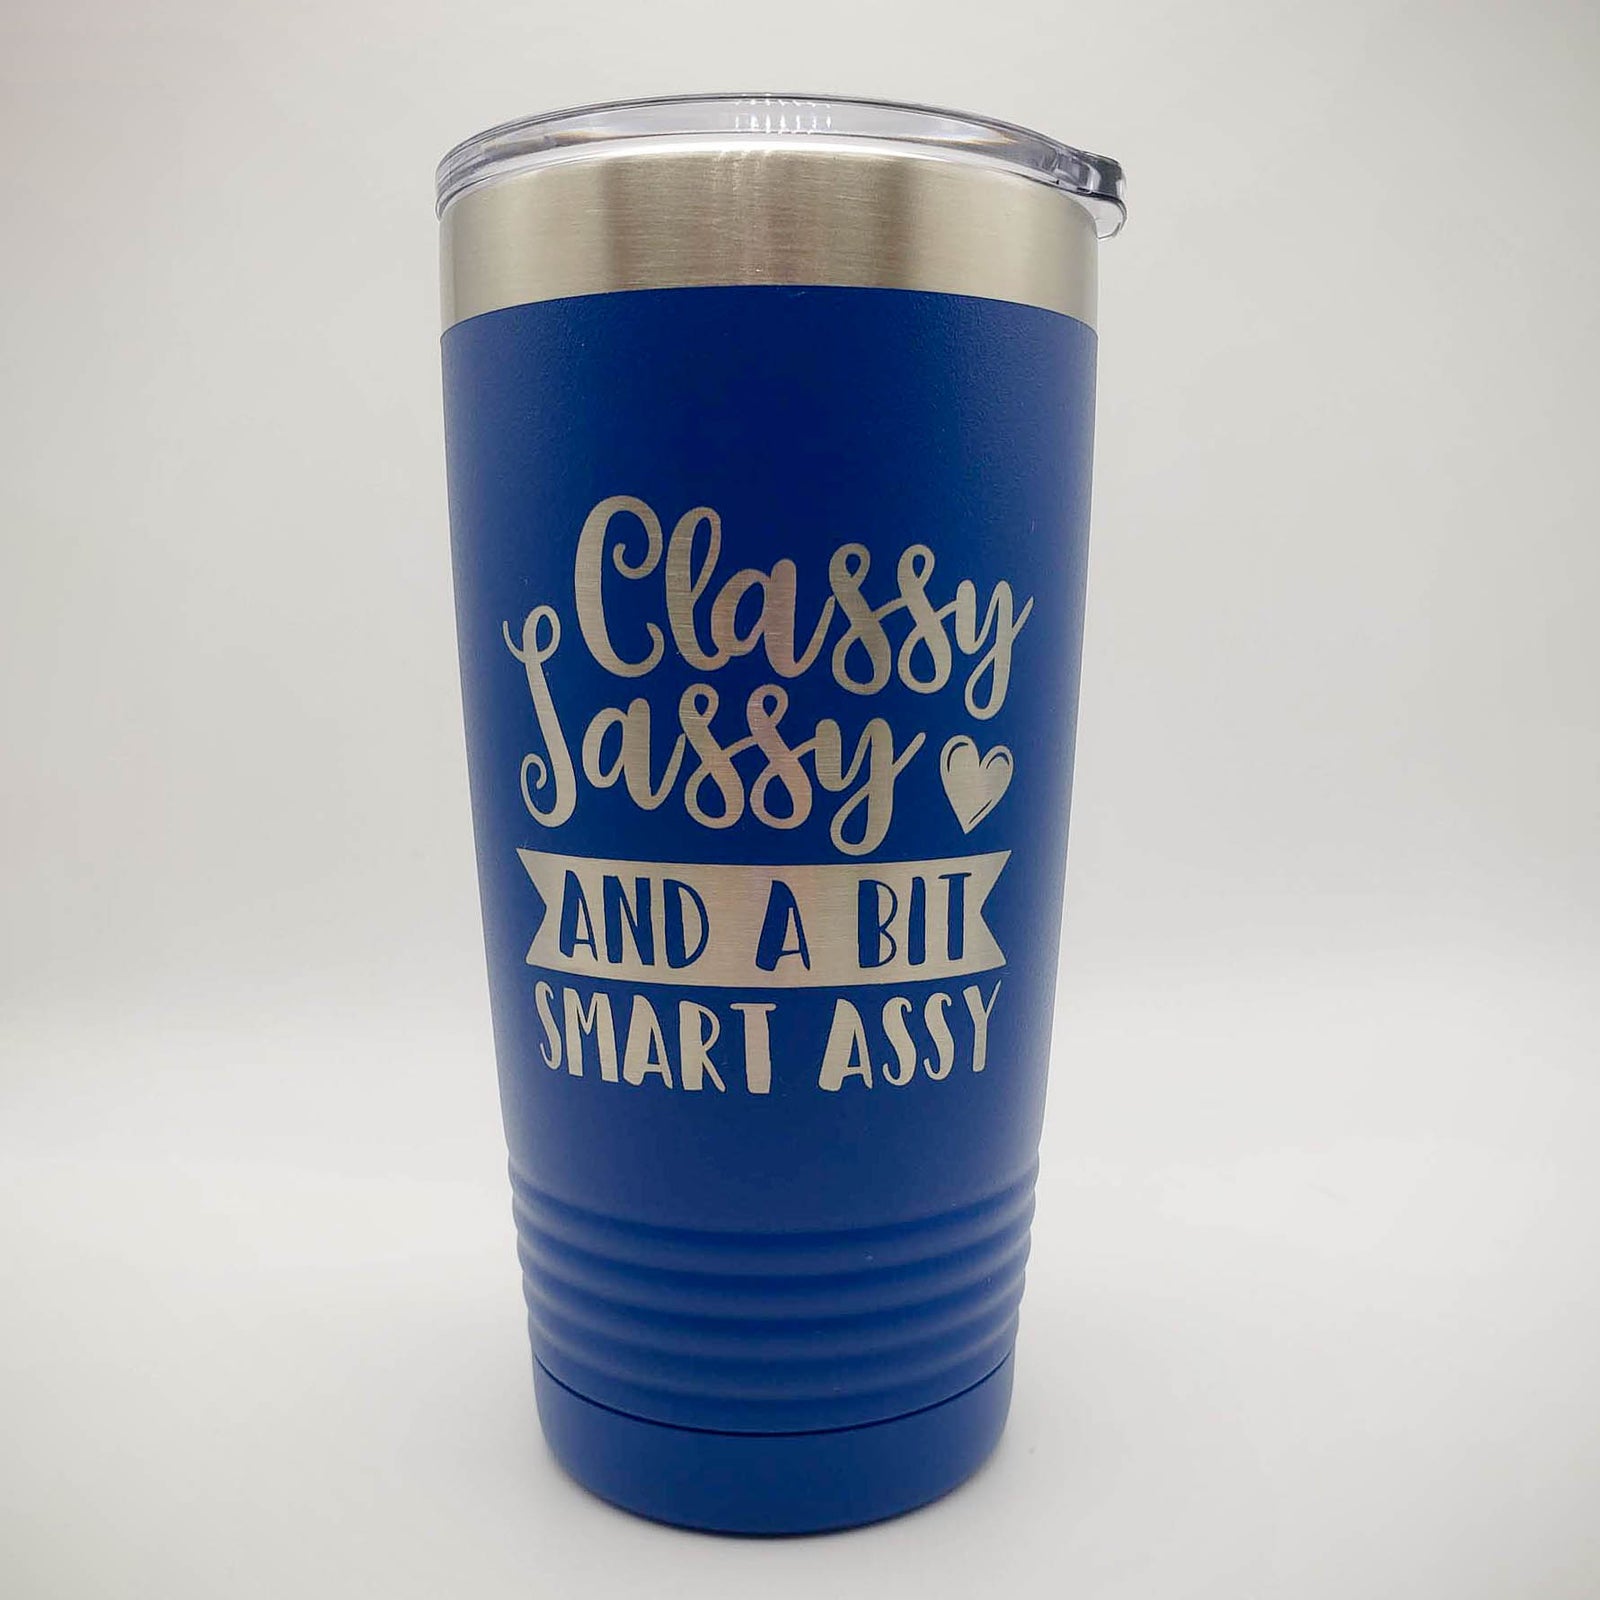 Sassy Little Soul 20oz. Insulated Water Bottle